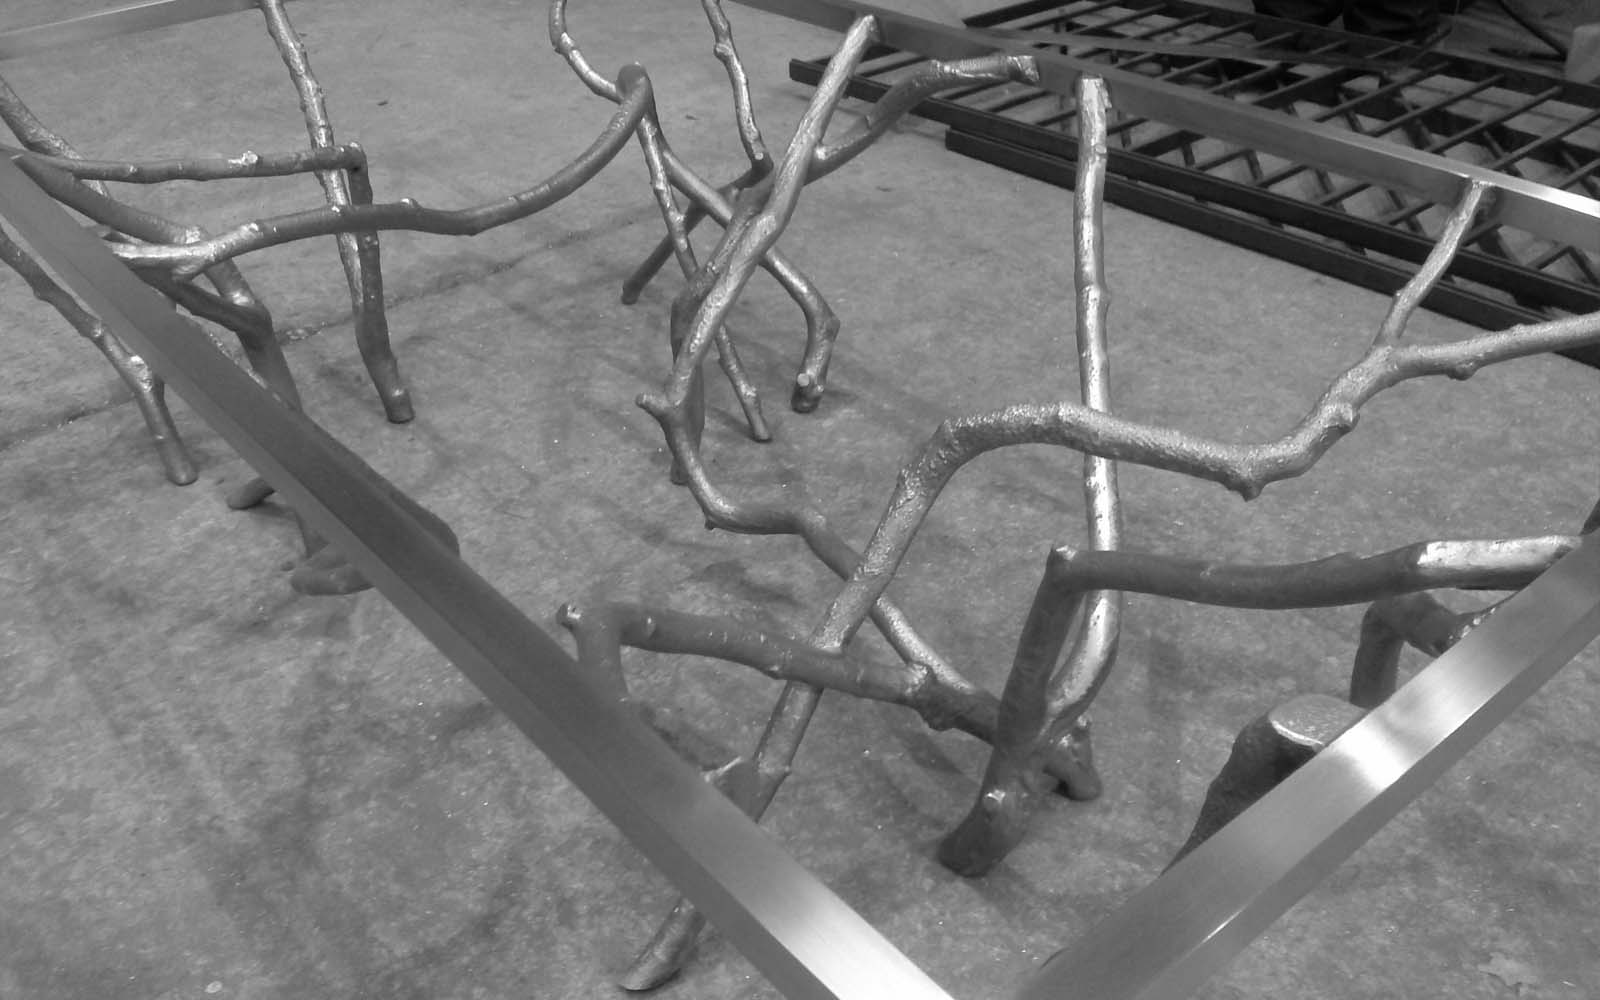 Metalwork branch glass table supporttory floor